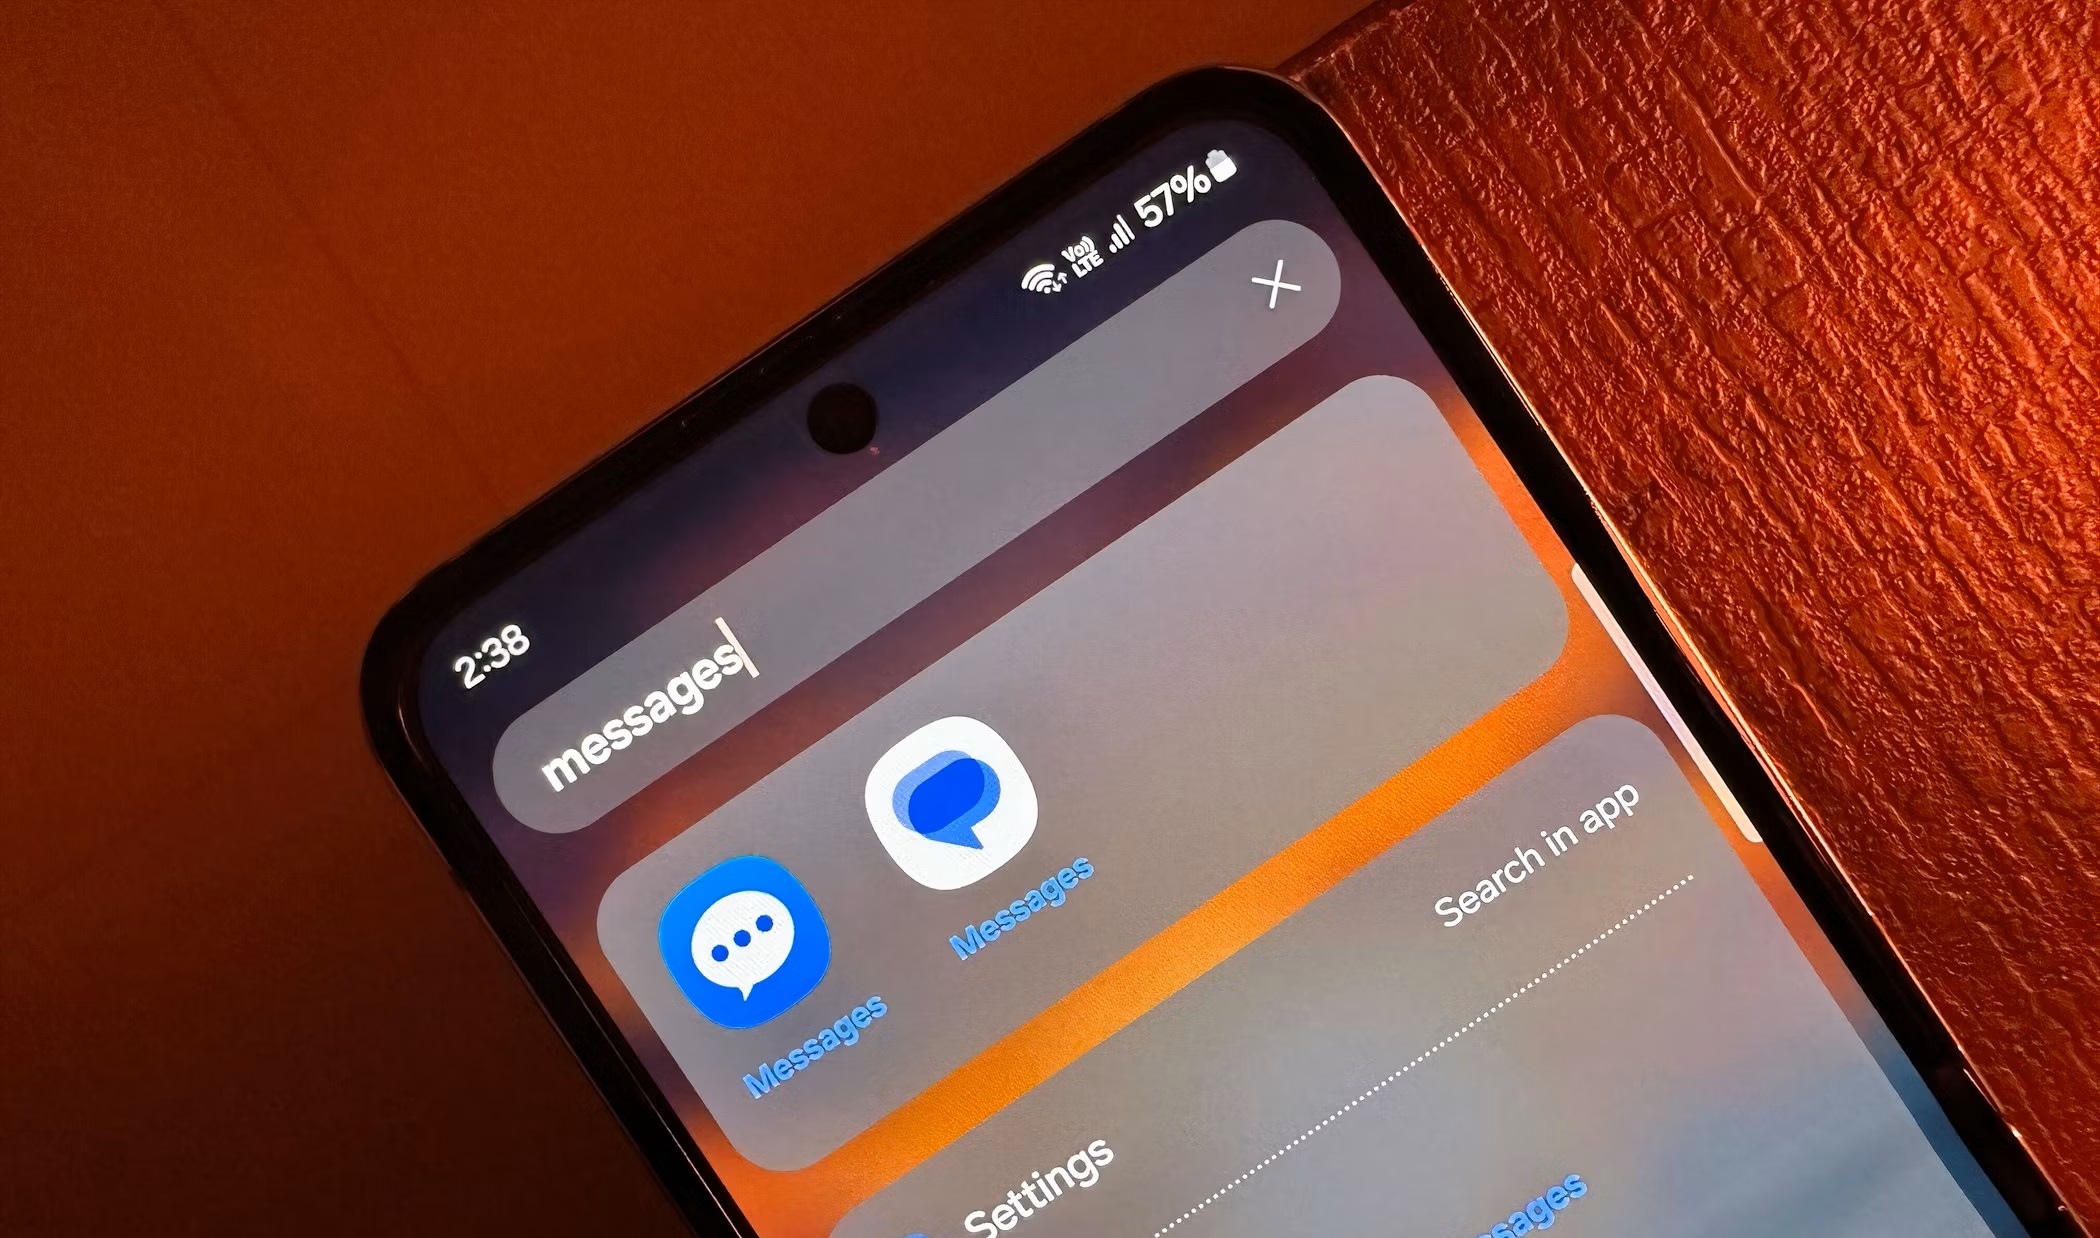 Samsung is removing its Samsung Messages app from Galaxy smartphones, replacing it with Google Messages